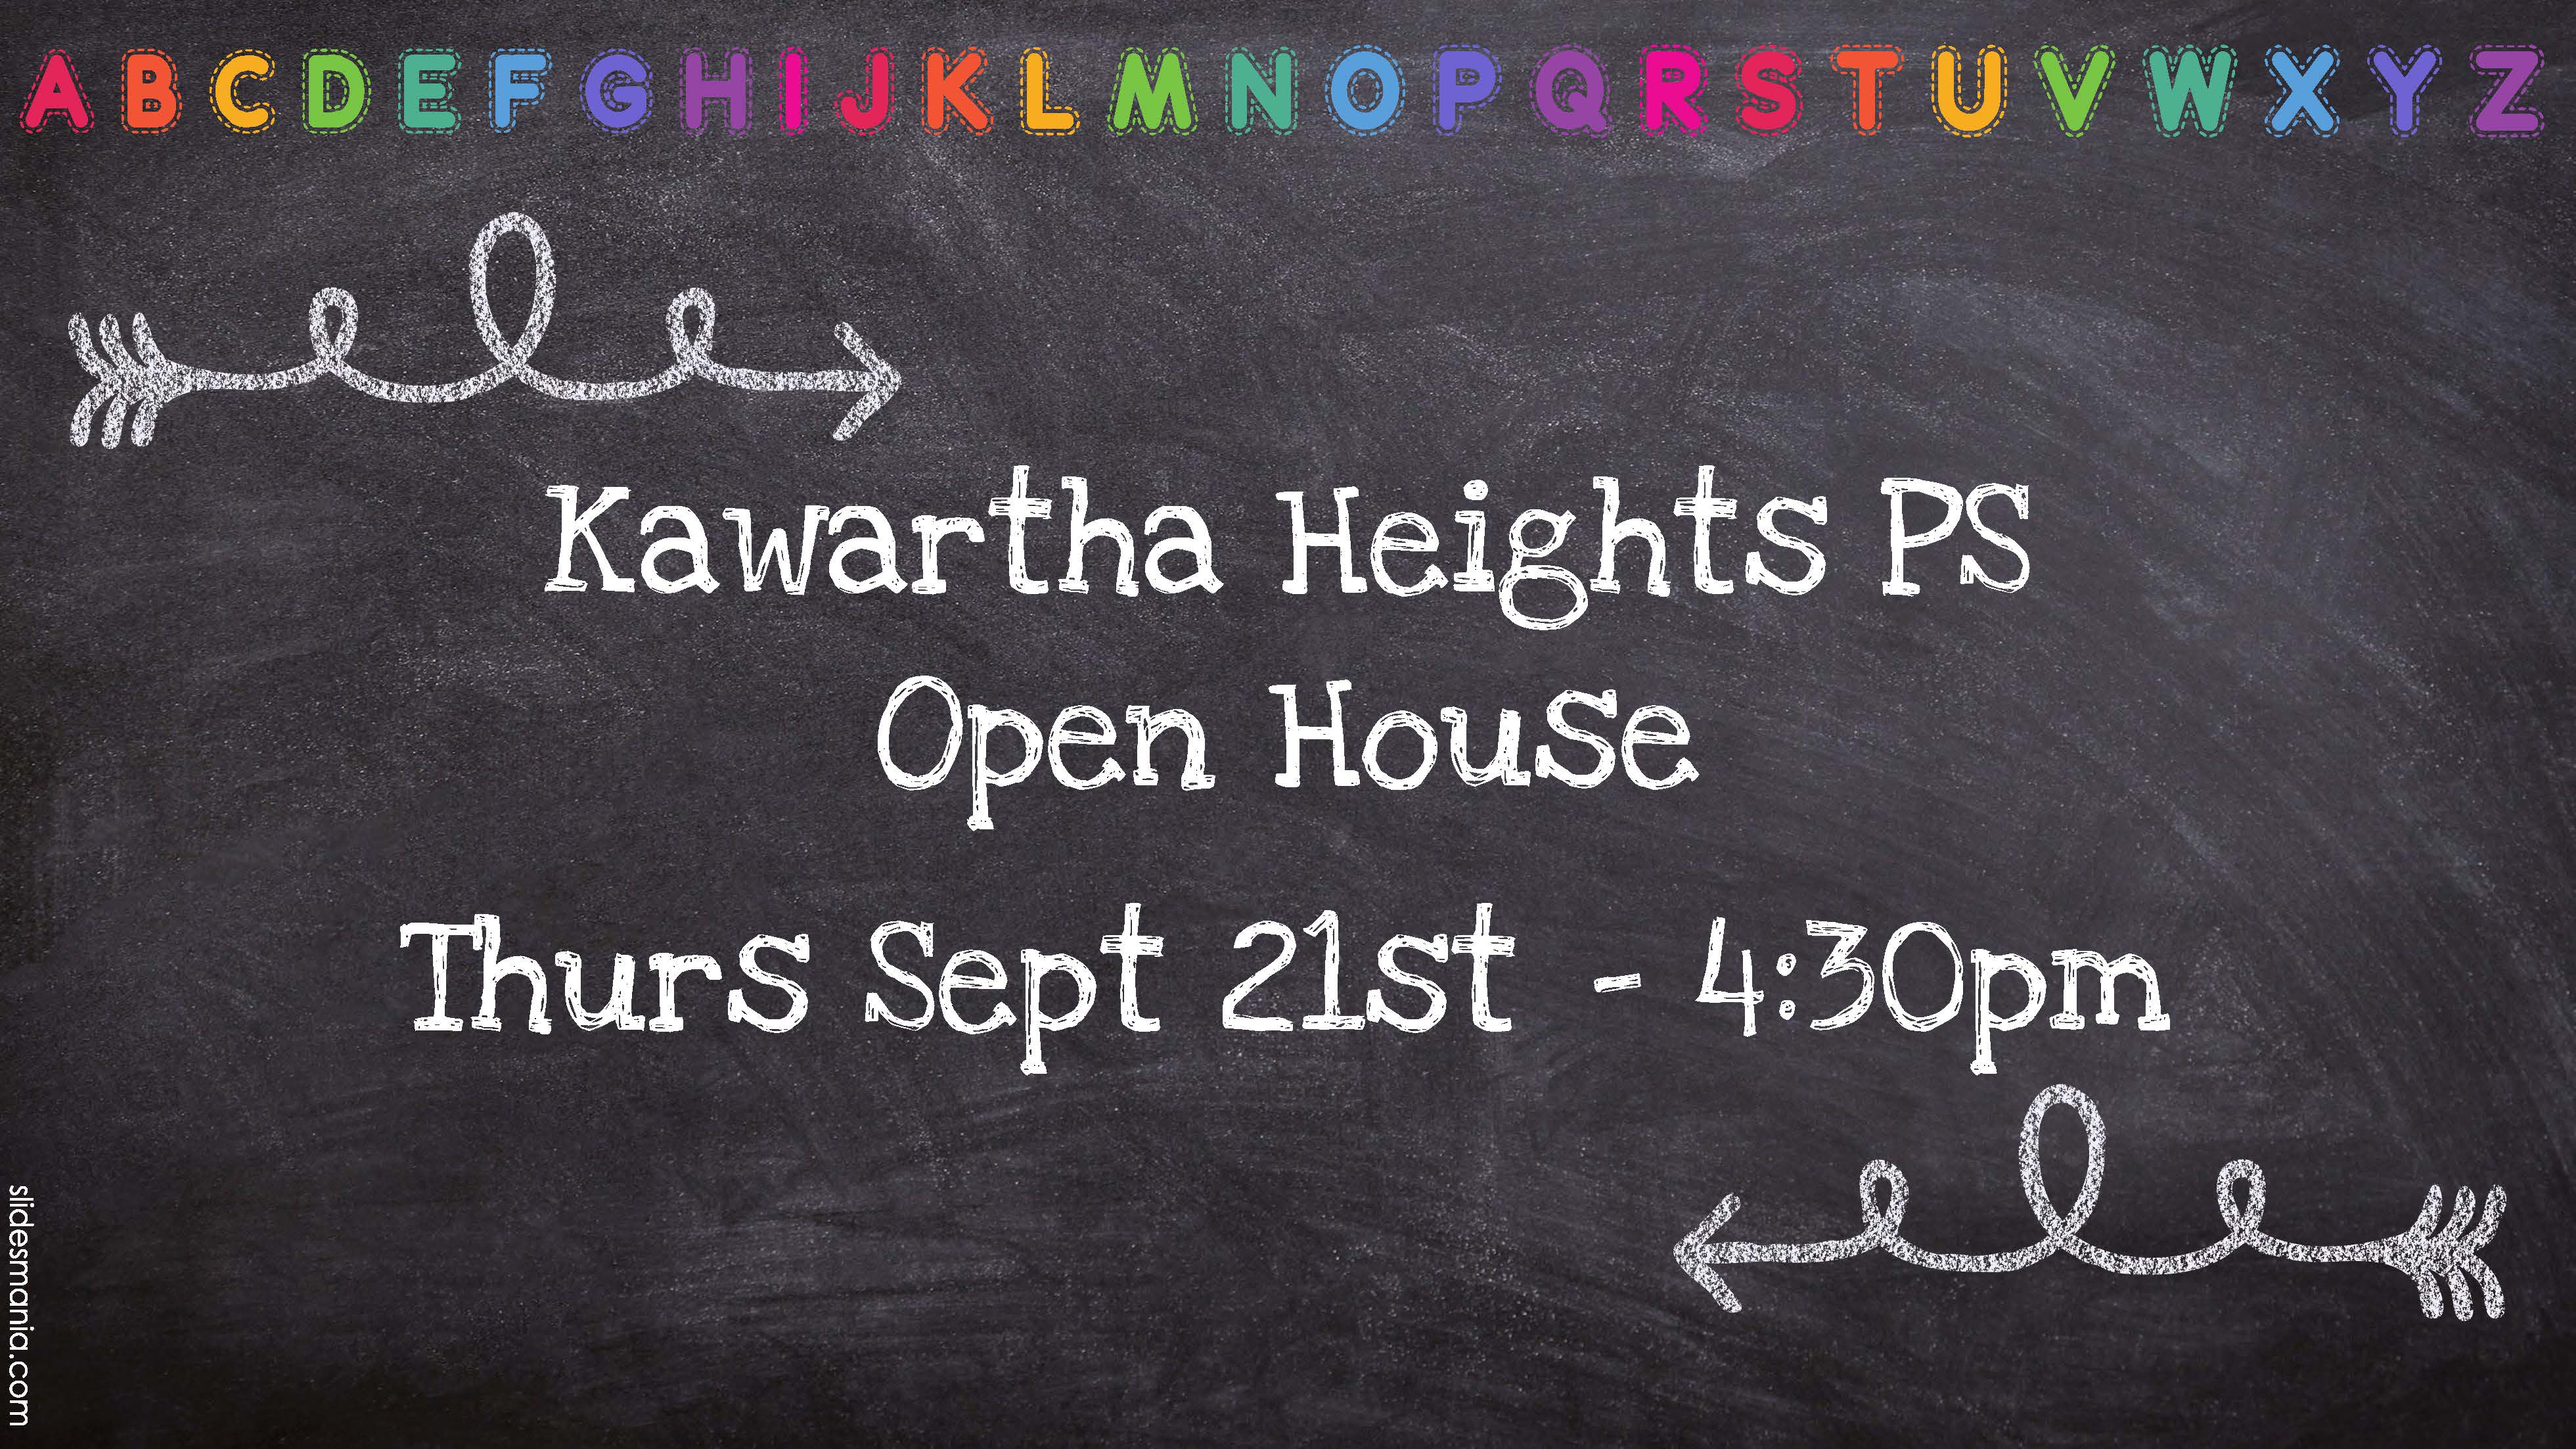 Open House Thursday Sept 21st - 4:30pm to 6:30pm